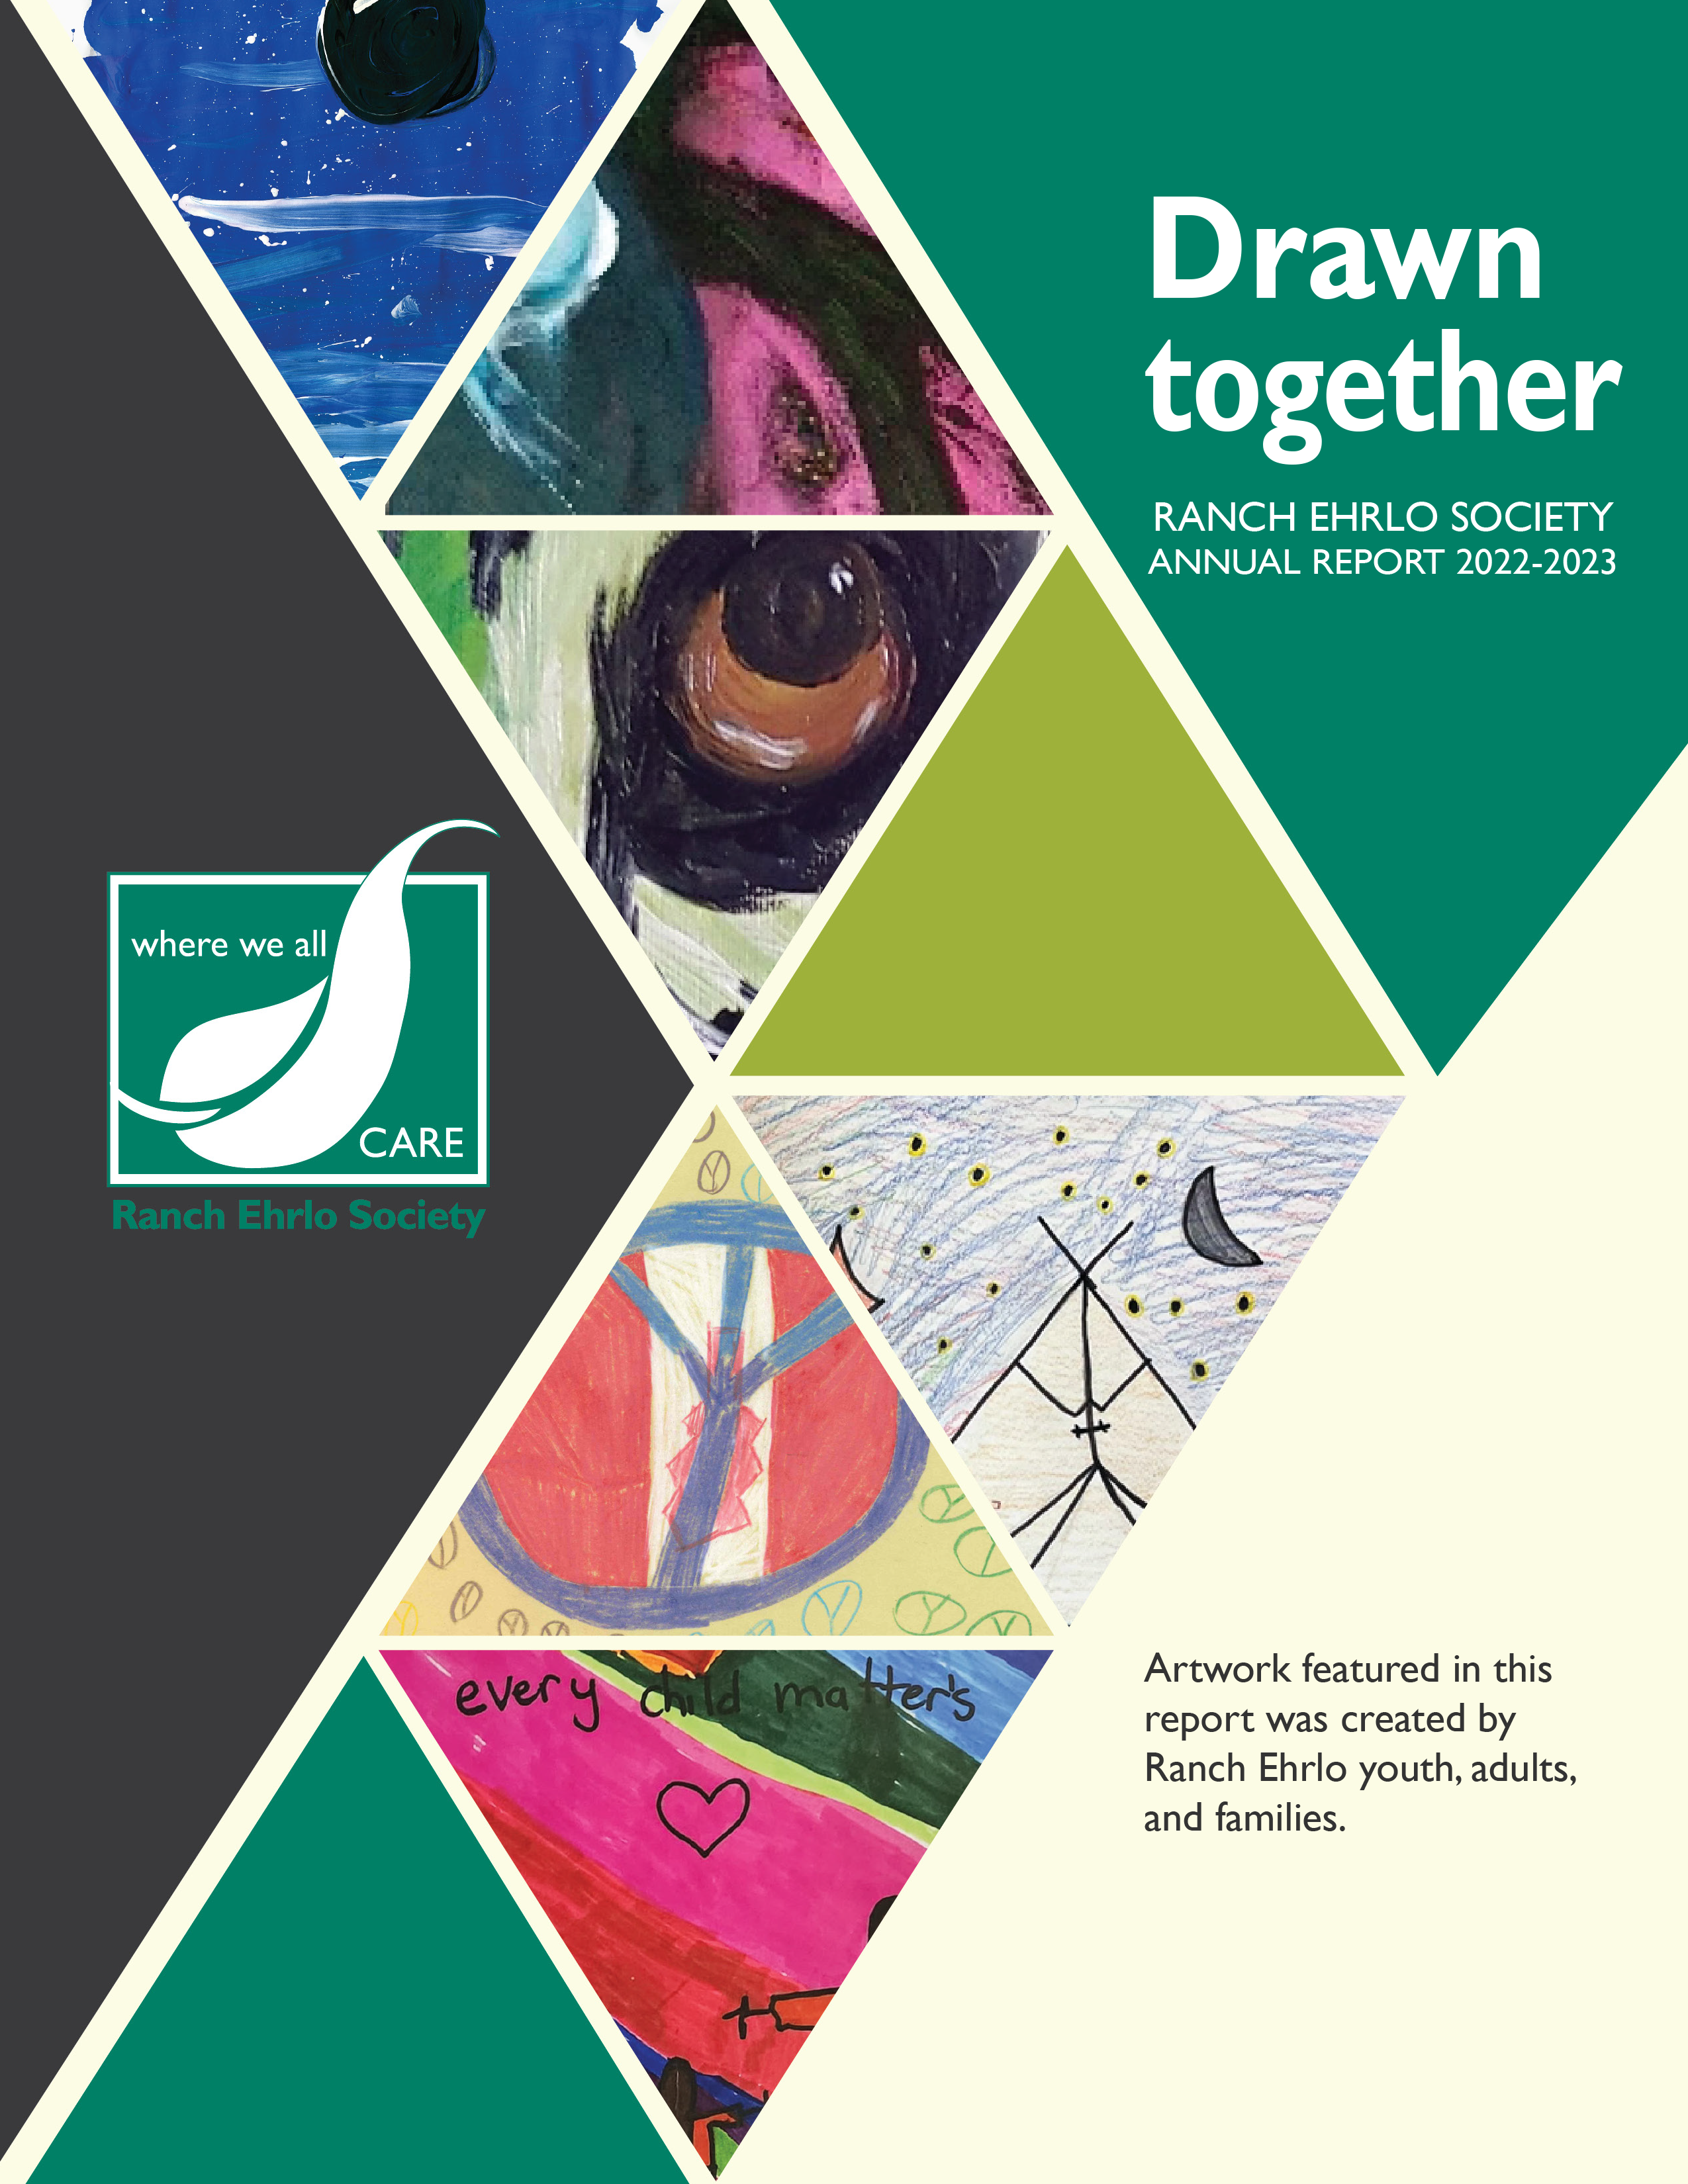 Drawn together, Ranch Ehrlo Society 2022-2023 Annual Report